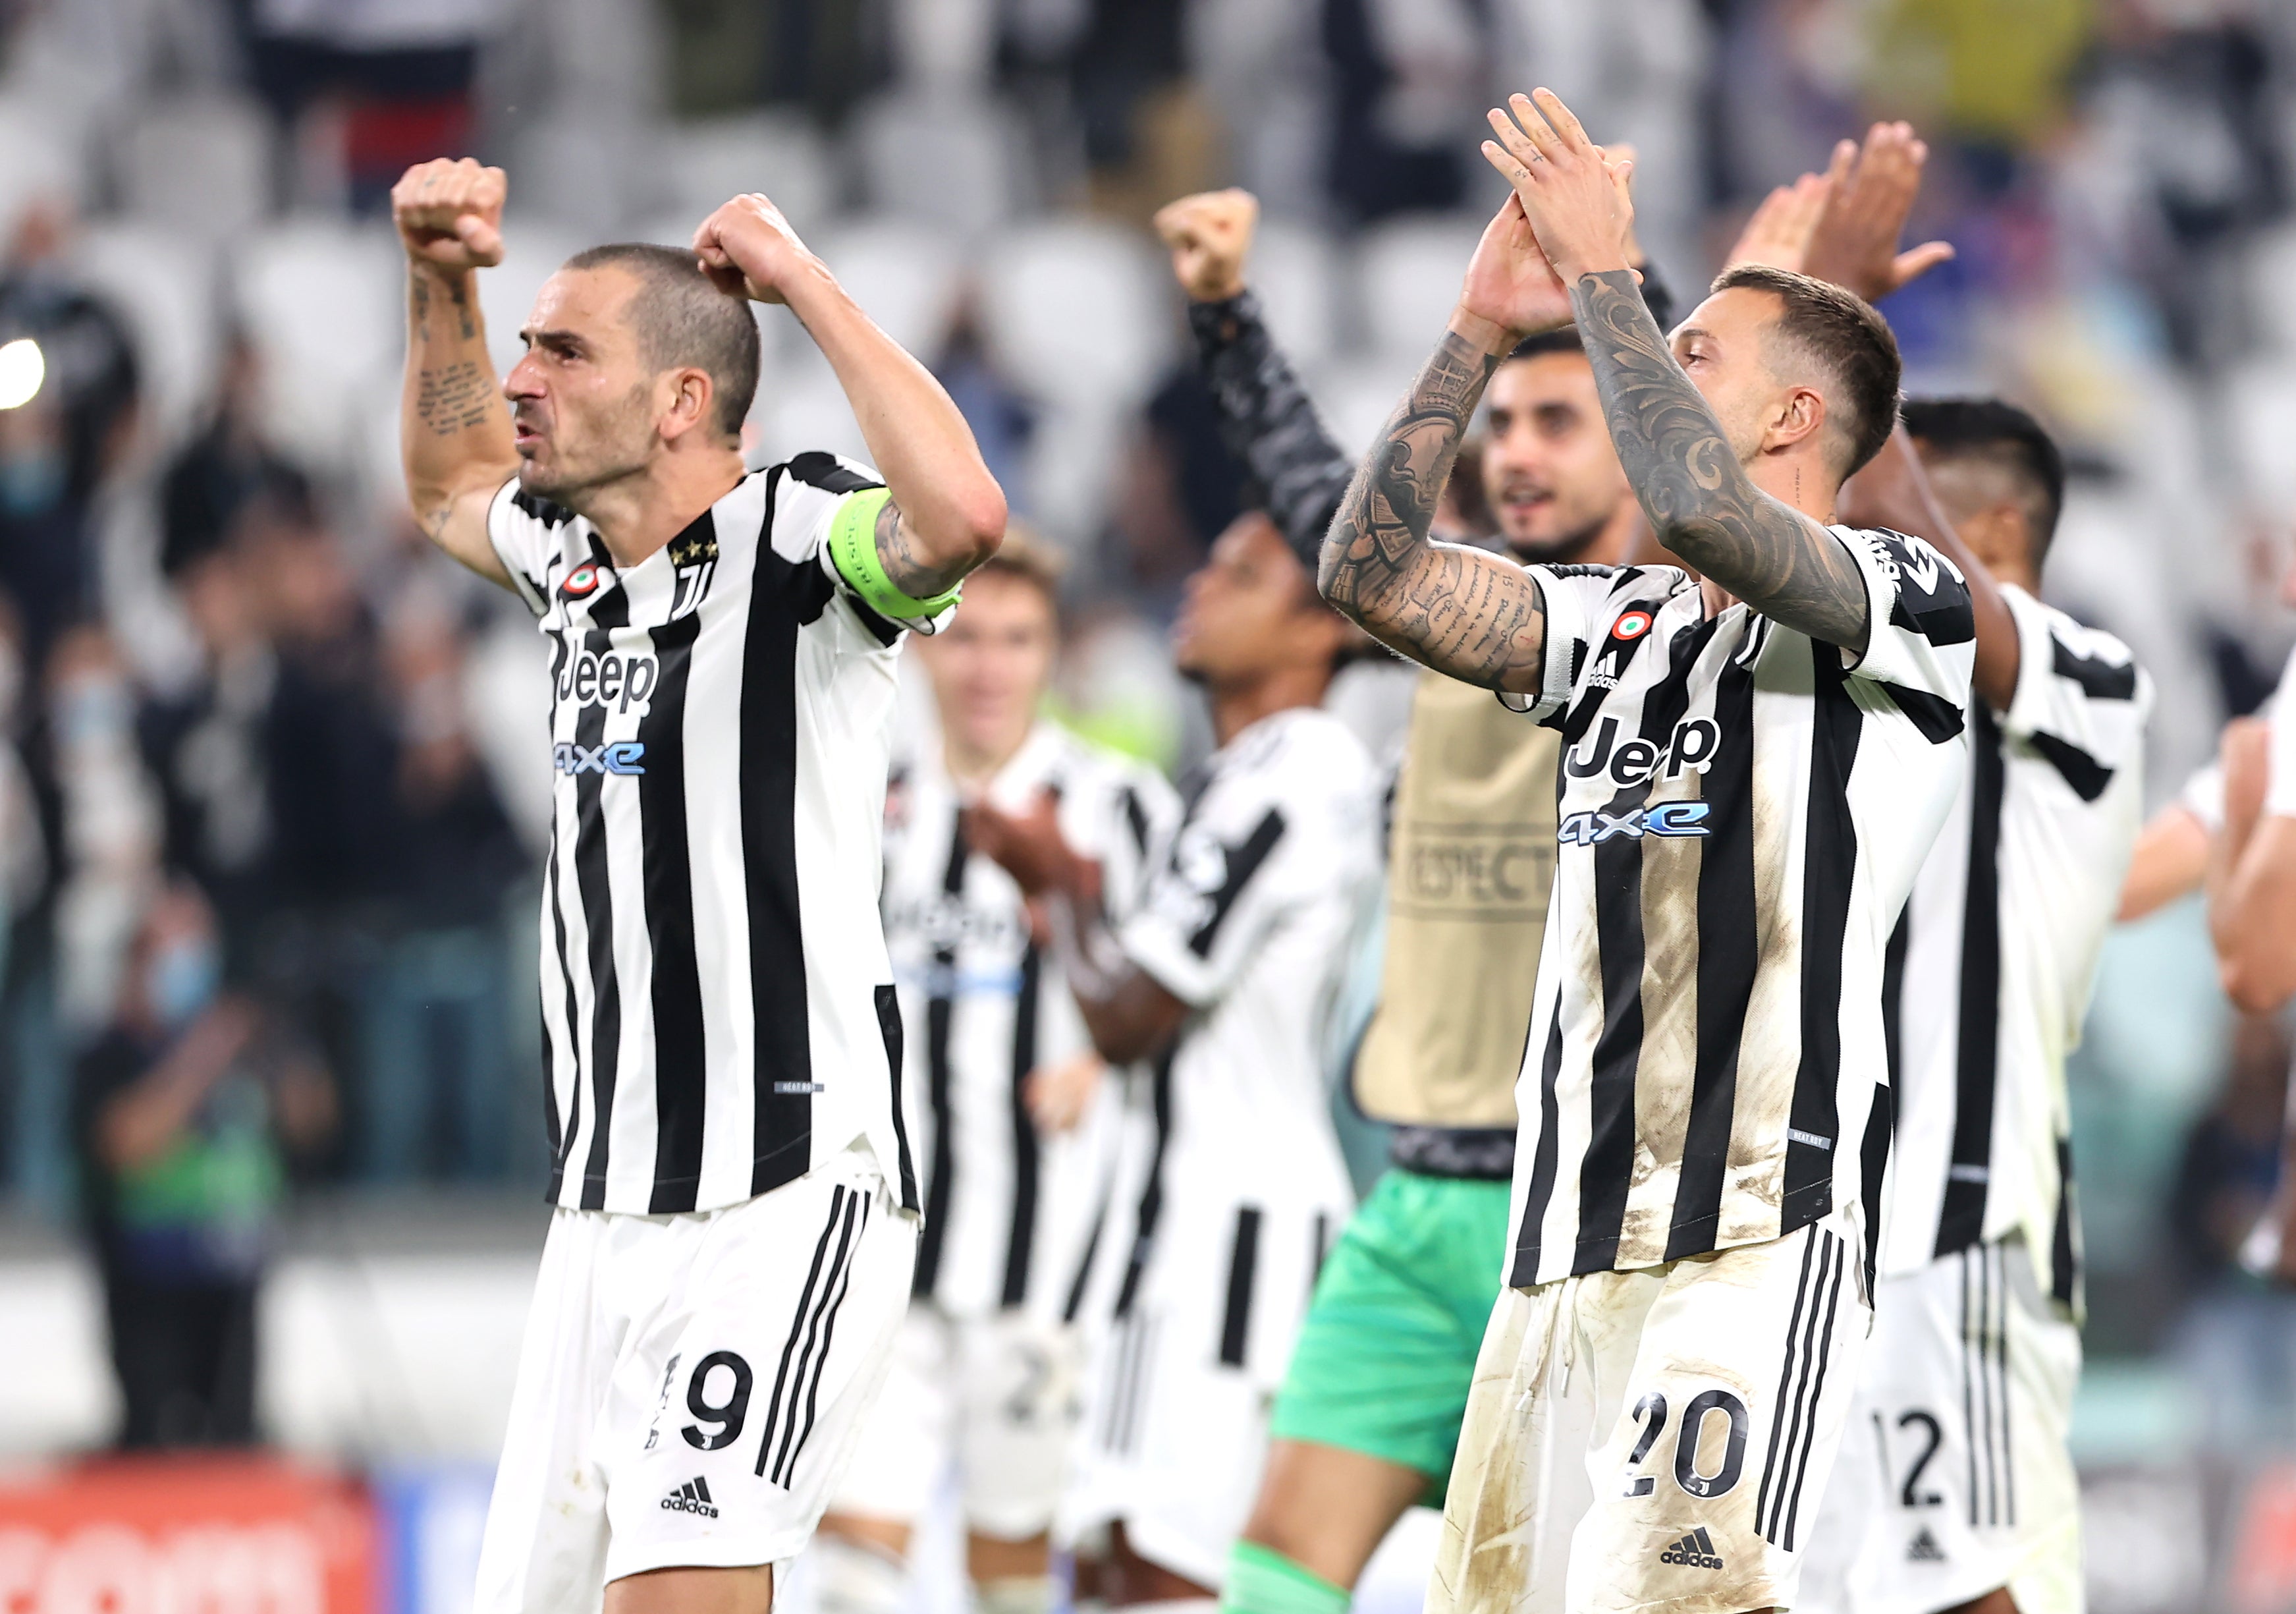 Juventus secured a 1-0 win over Thomas Tuchel’s Chelsea (Fabrizio Carabelli/PA)